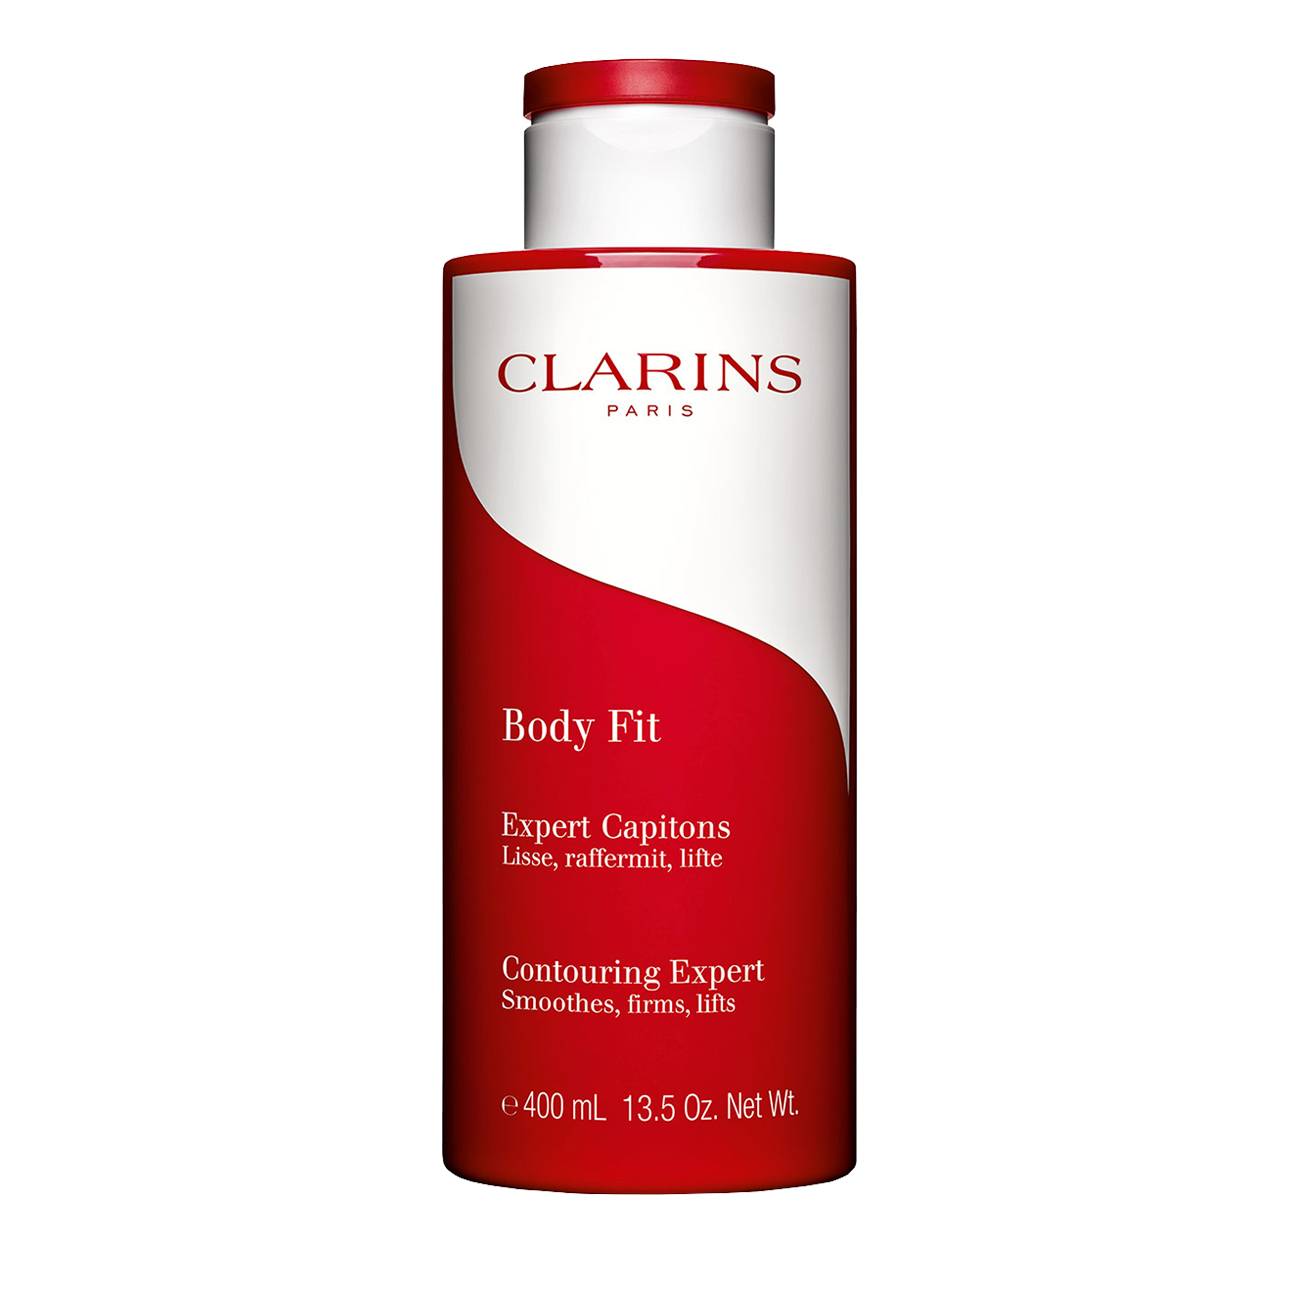 Body Fit Anti-cellulite Contouring Expert 400 Ml - Clarins